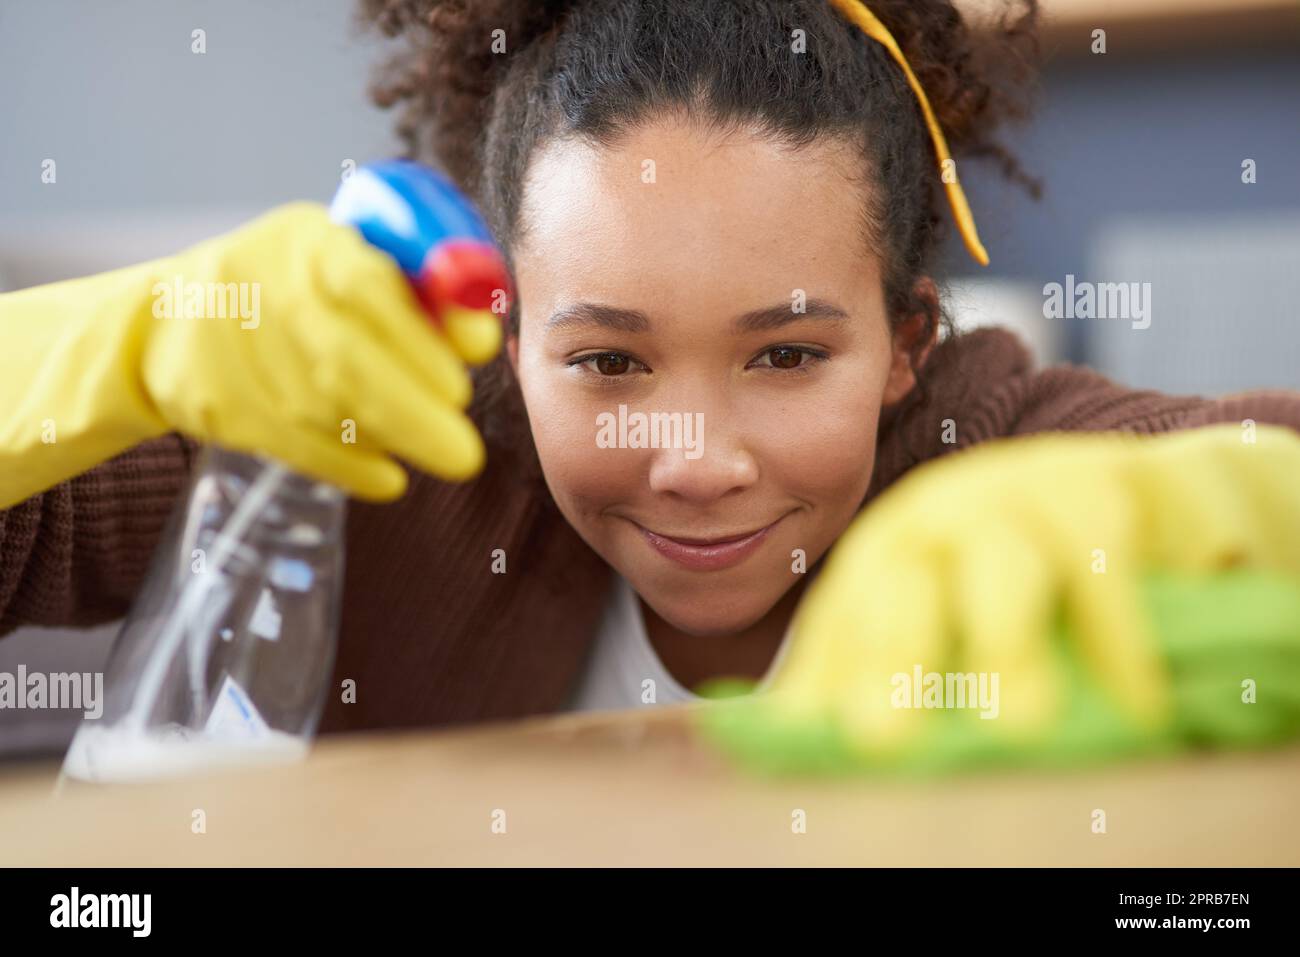 Sorry germs, you chose the wrong house. a woman wearing gloves and holding a spray bottle while cleaning a wooden surface at home. Stock Photo